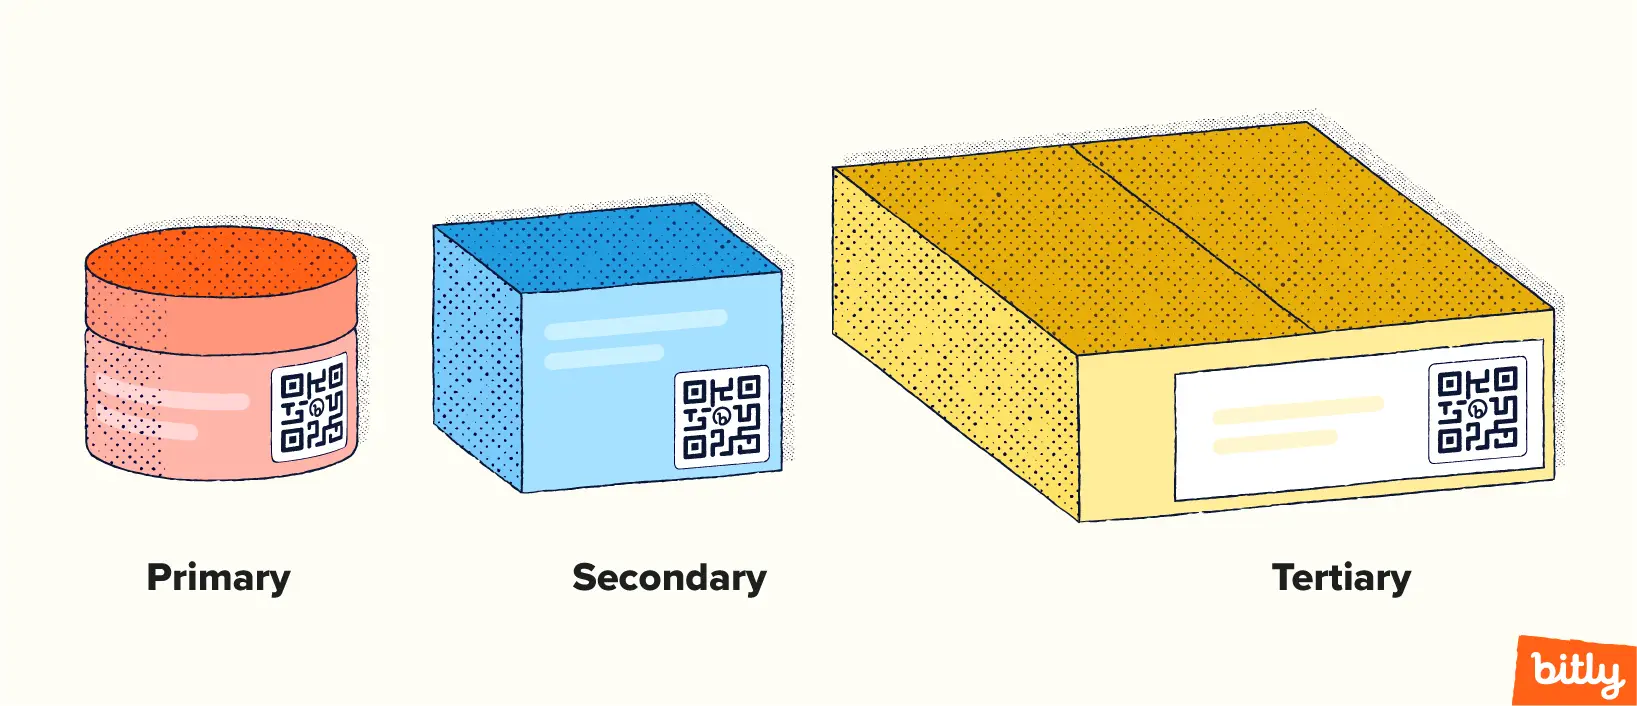 Primary, secondary, and tertiary examples of product packaging with QR Codes on them. 